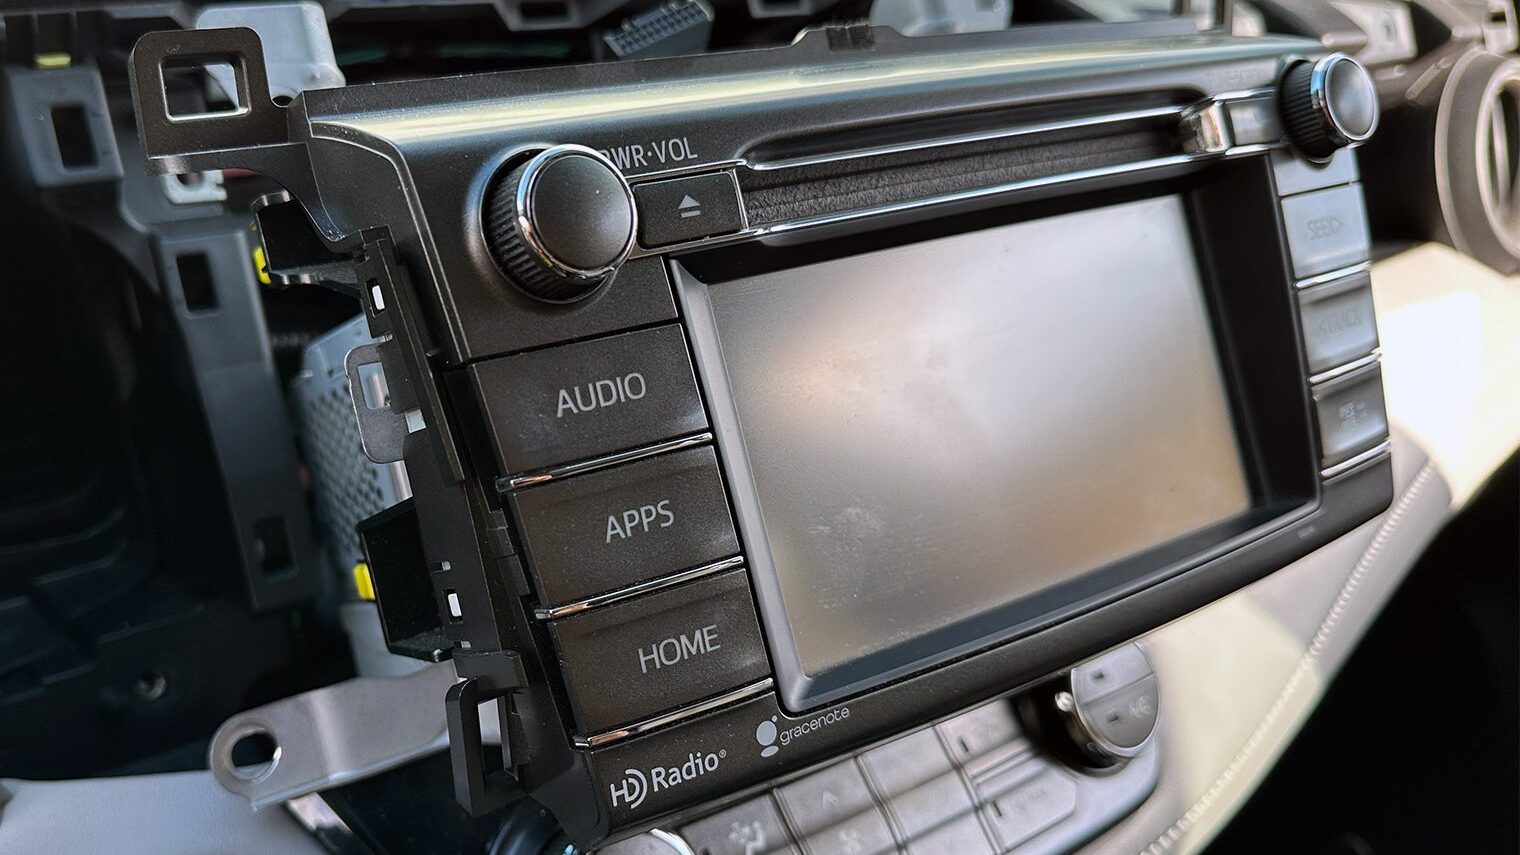 Removing OEM head unit on a Toyota RAV4 to install an aftermarket Sony